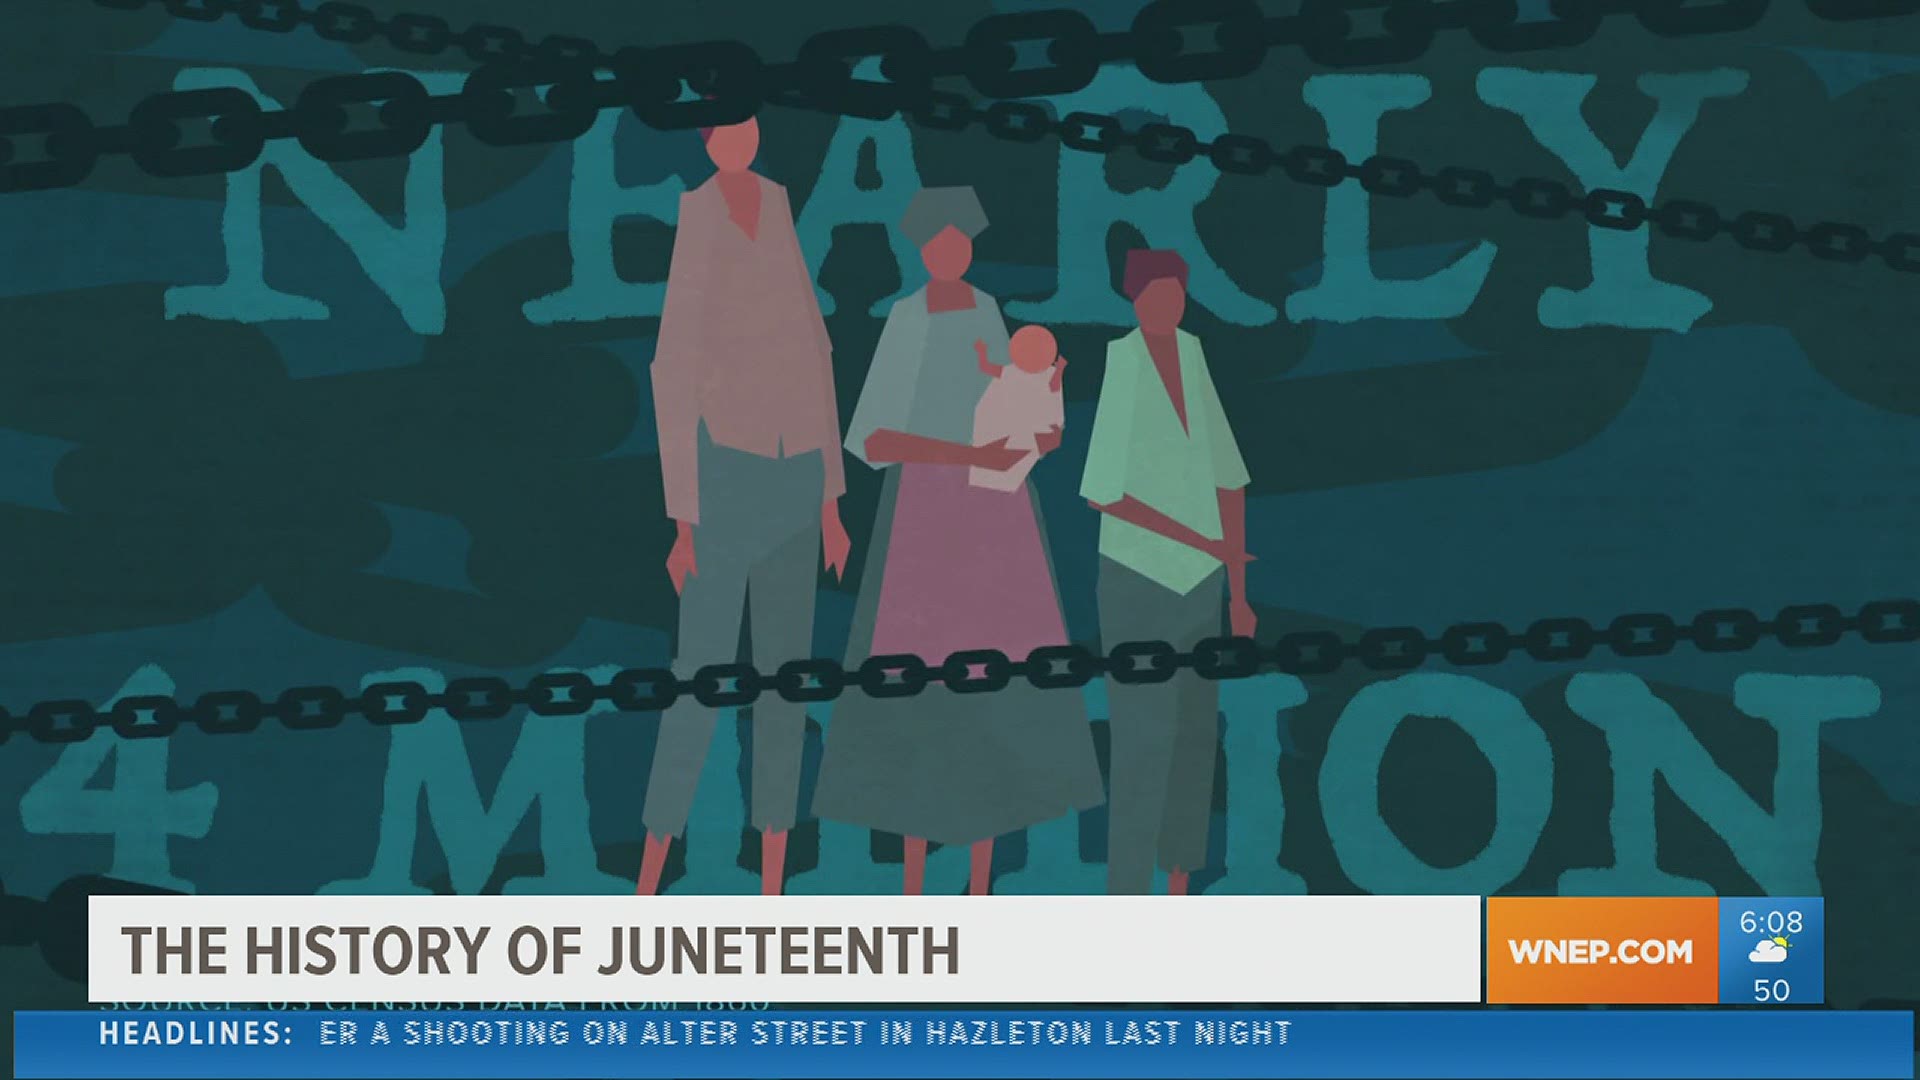 Brandon Park in Williamsport is one of many cities holding Juneteenth Celebrations this weekend. Newswatch 16's Ryan Leckey has the details.